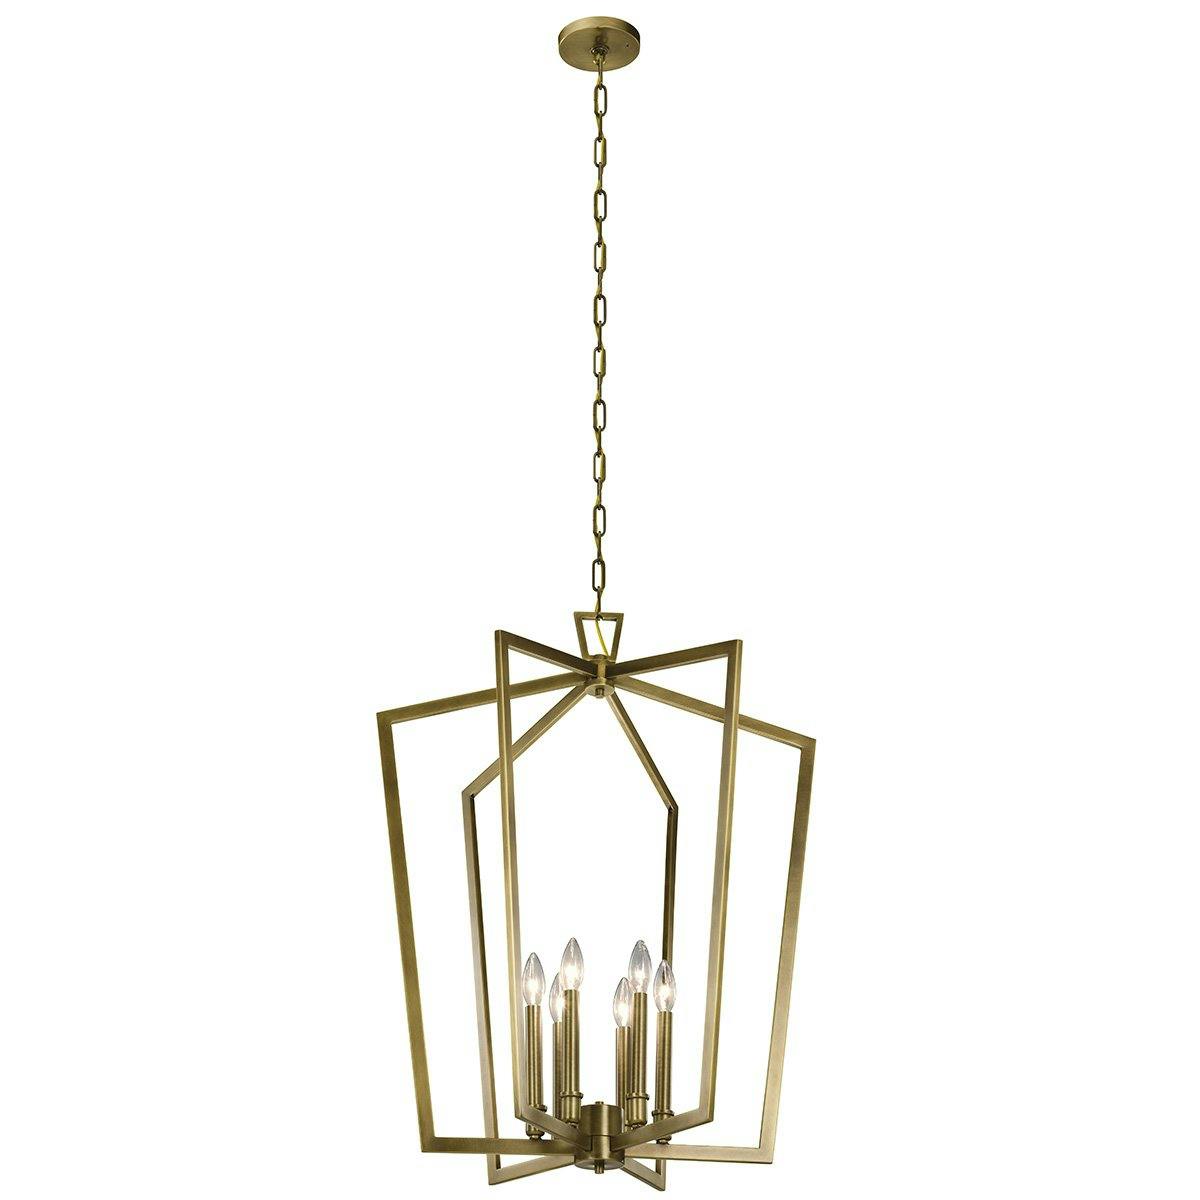 Abbotswell 32.25" Chandelier Brass on a white background